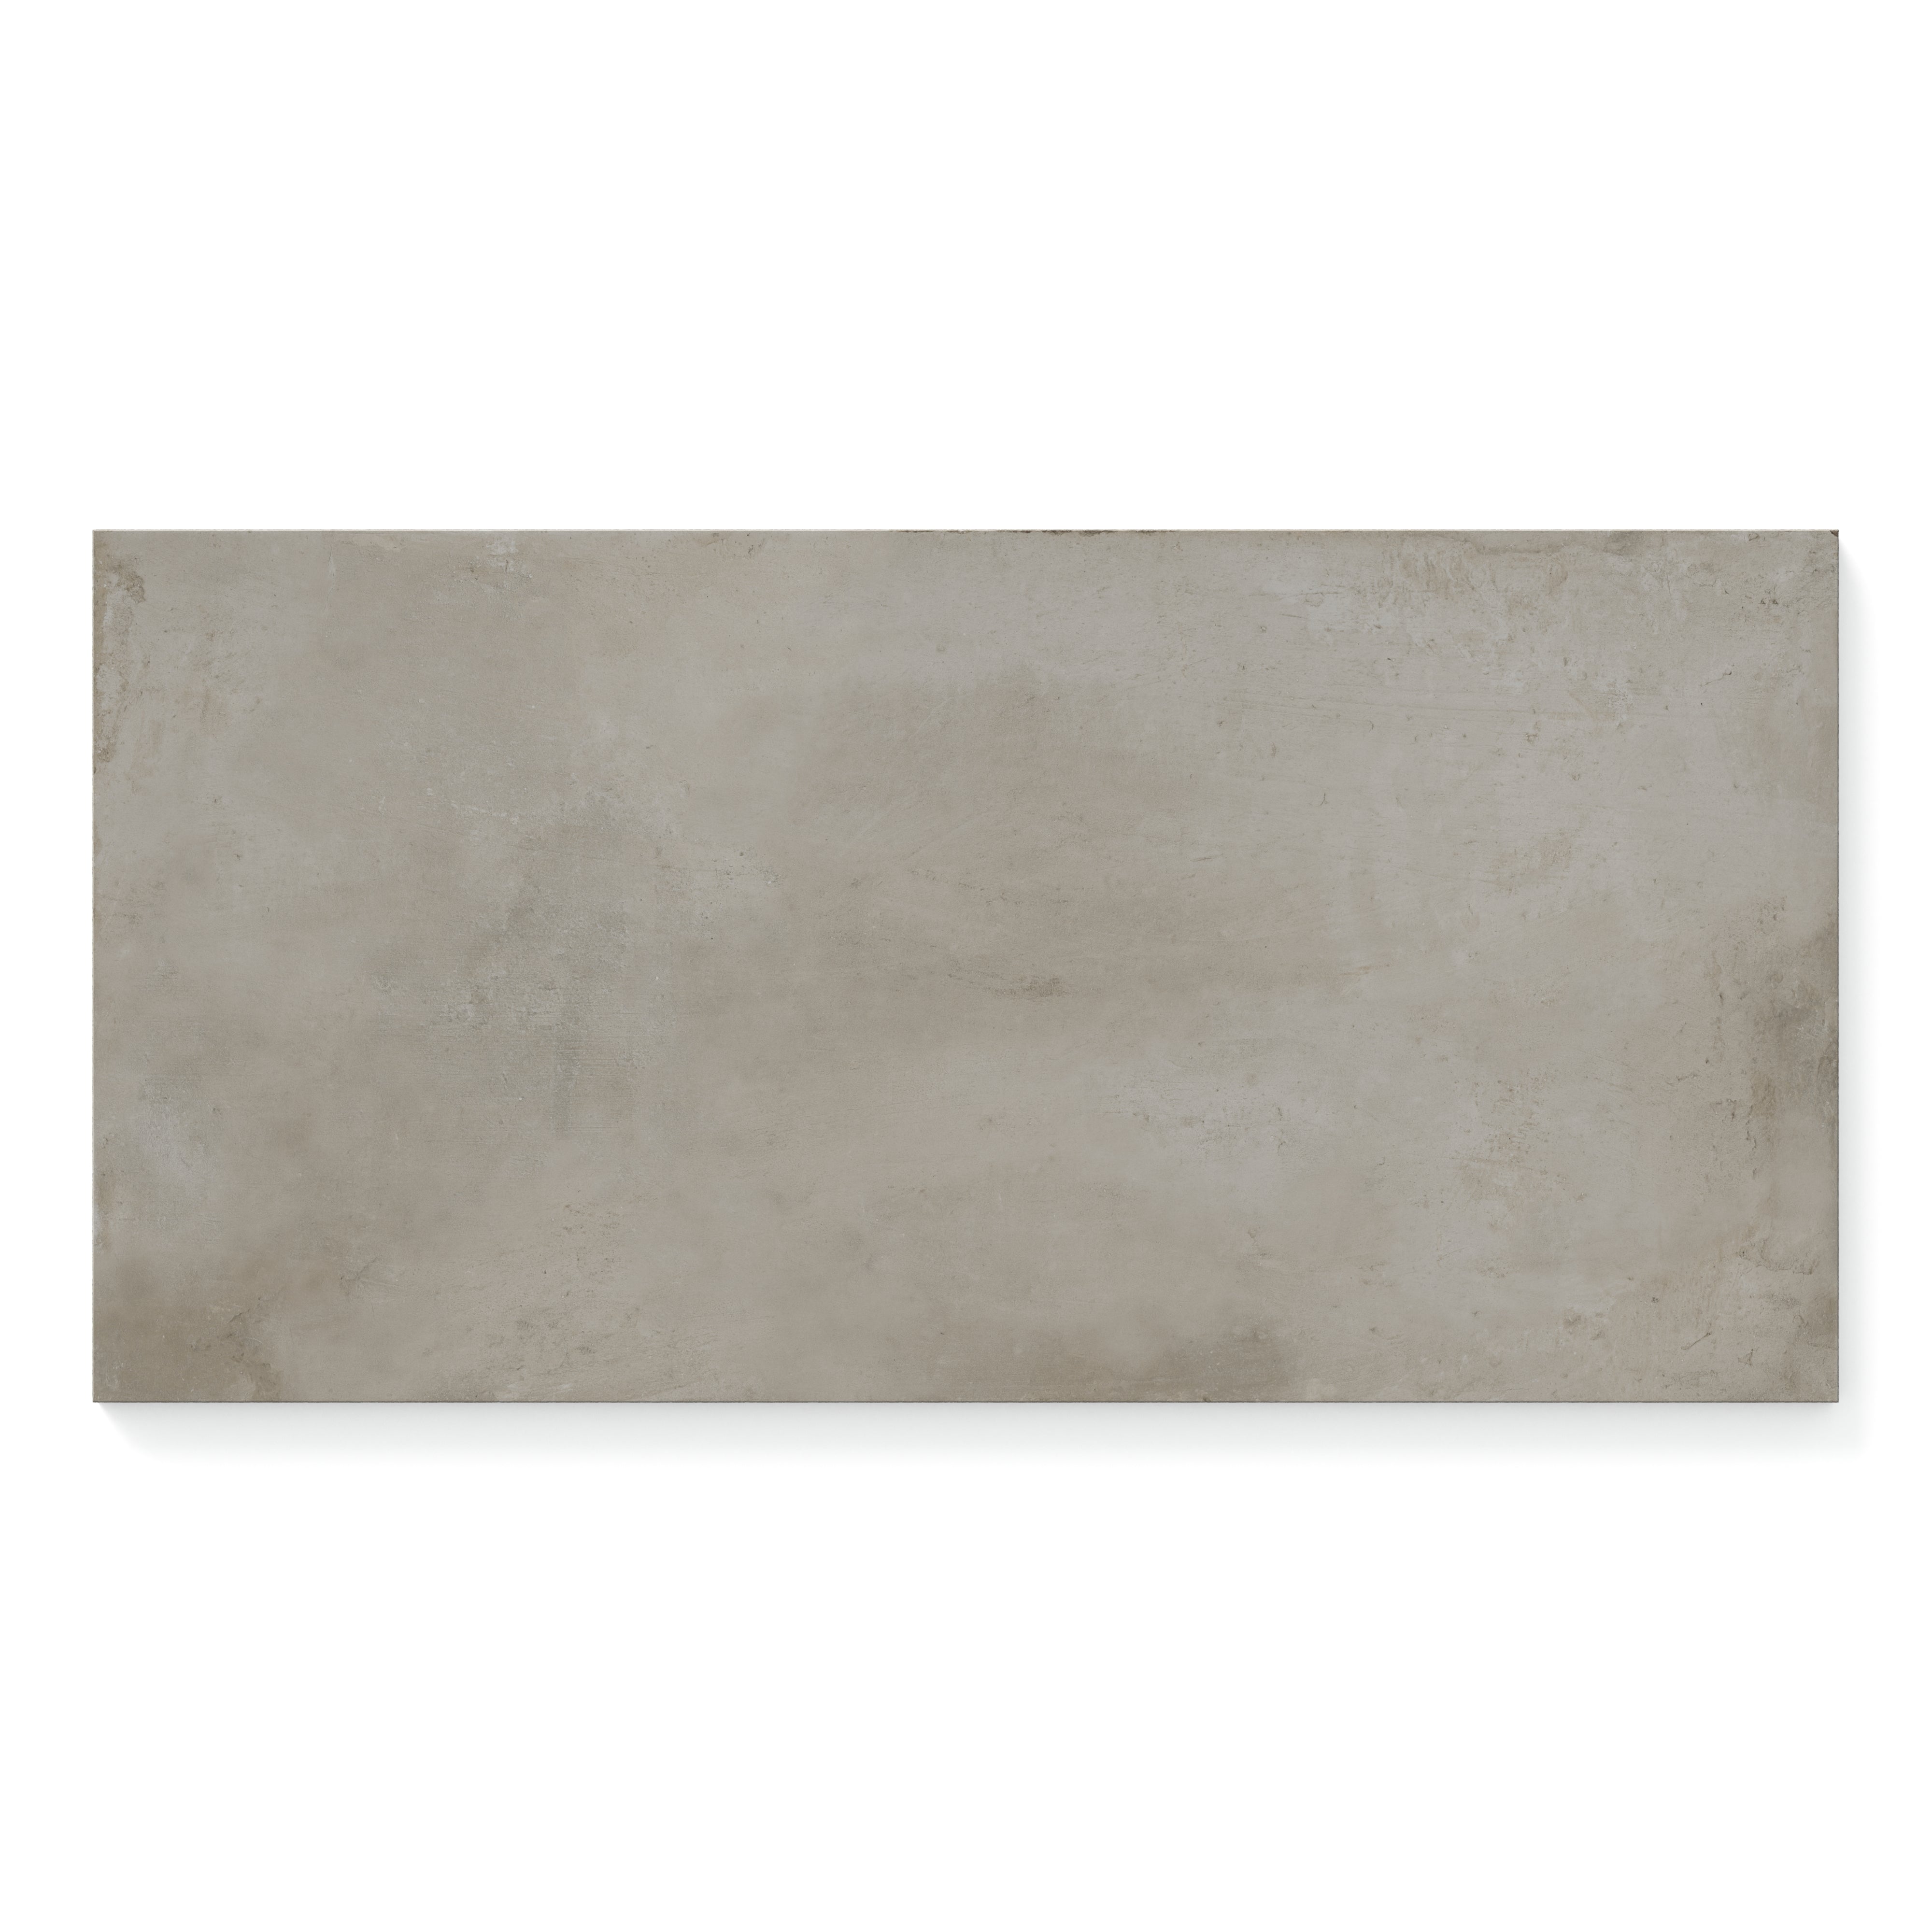 Ramsey 24x48 Grip Porcelain 2cm Paver Tile in Putty